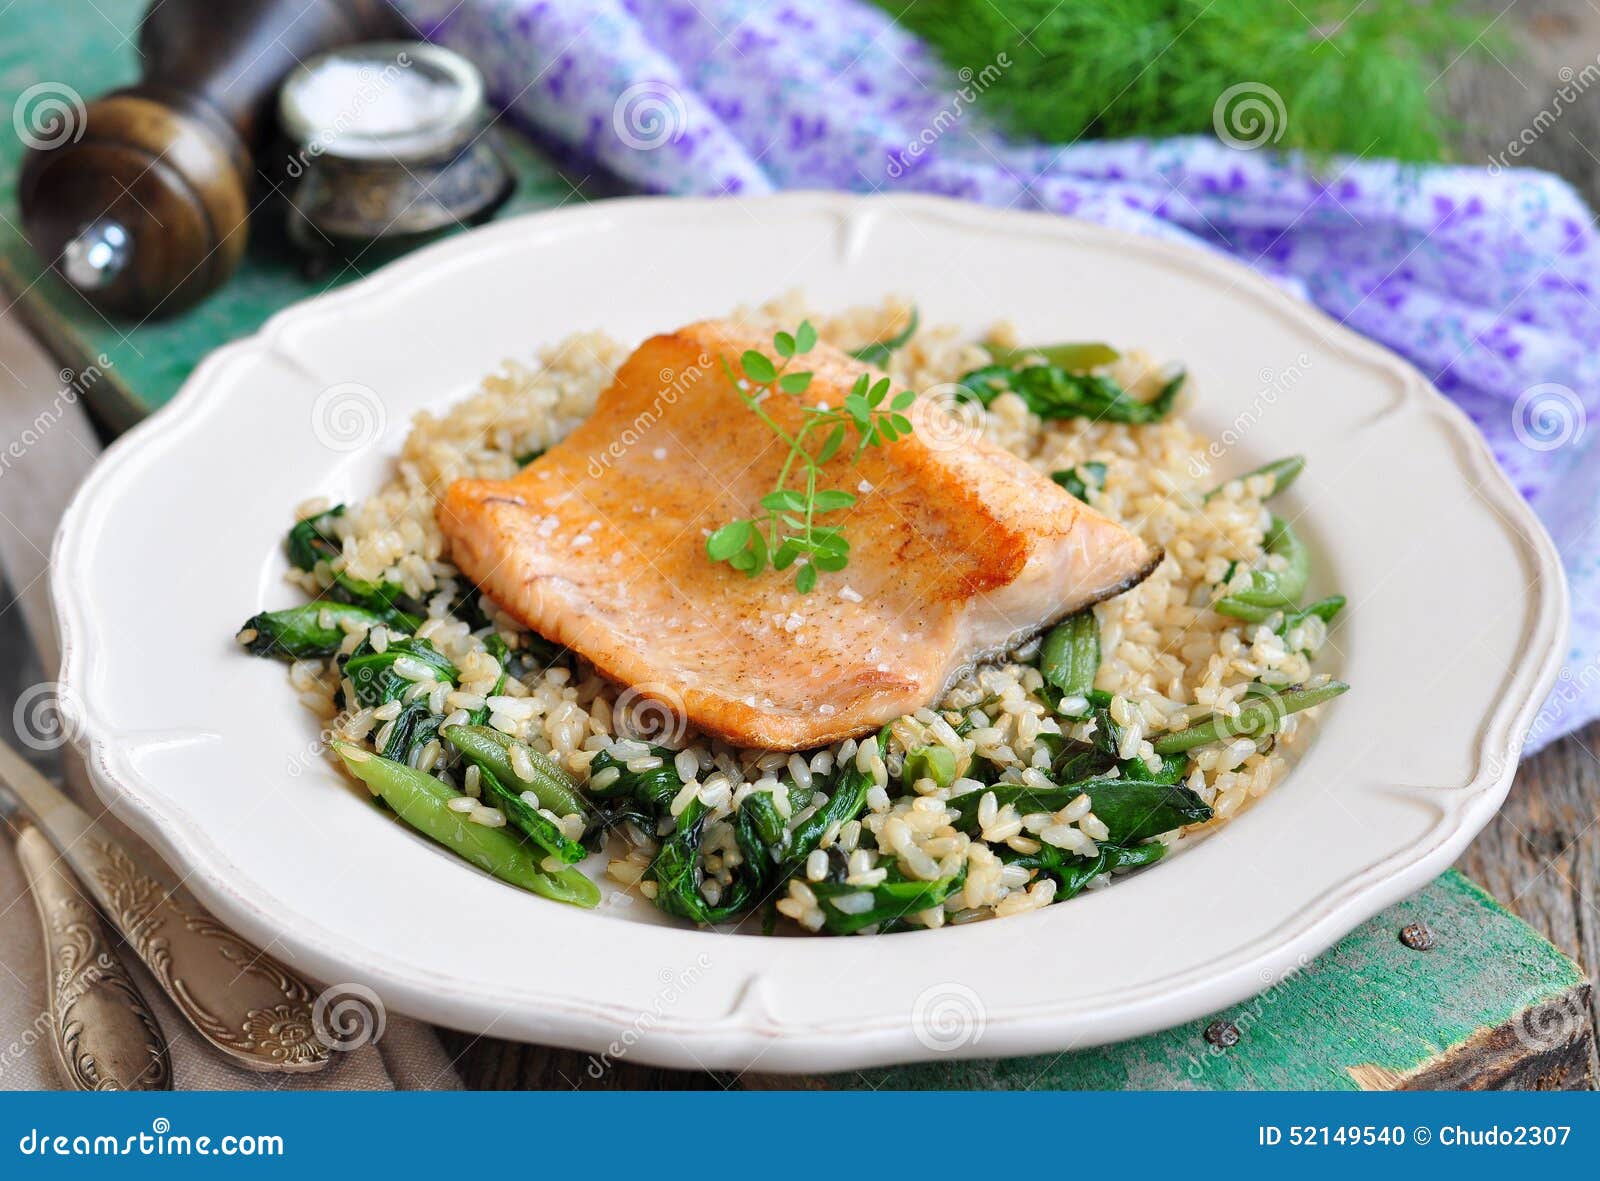 fried salmon with brown rice, spinach and leguminous kidney bean